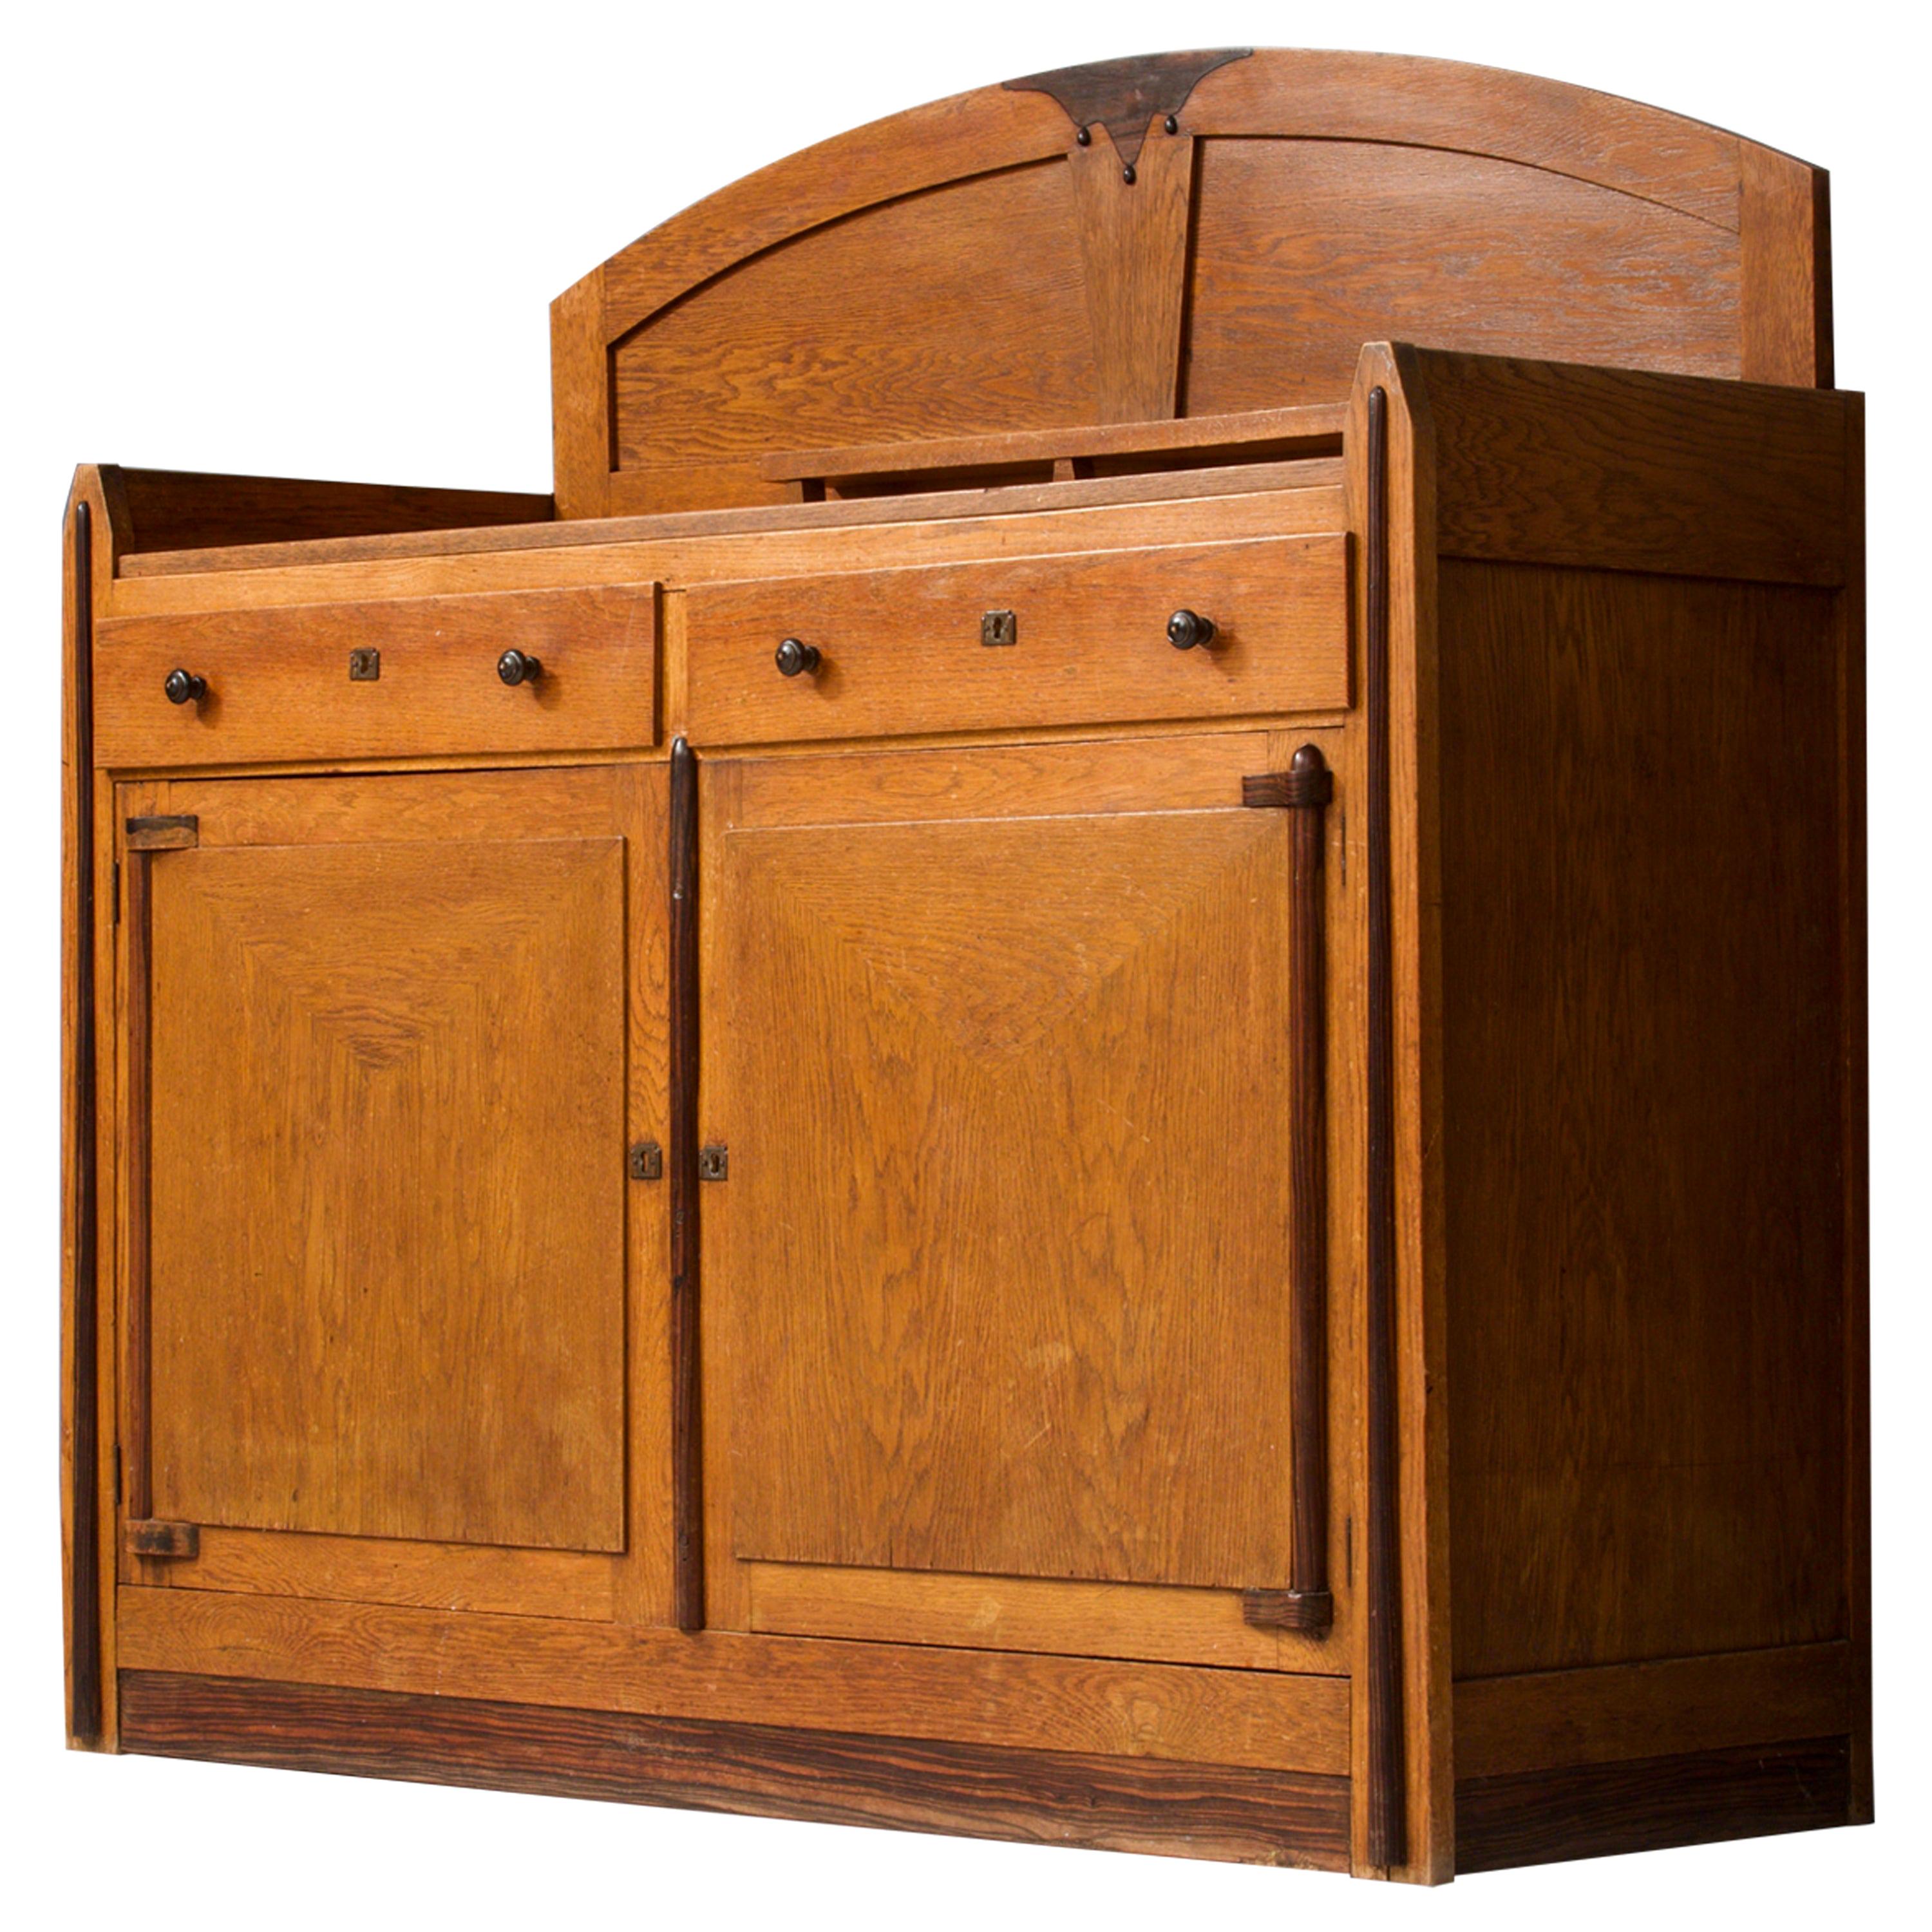 Very well preserved Art Deco bar cabinet from the late 1920s. This high cabinet has a lot of typical details from the Dutch Amsterdamse School Period, that reflects the architectural style that was very dominant at that time. Lots of houses here in